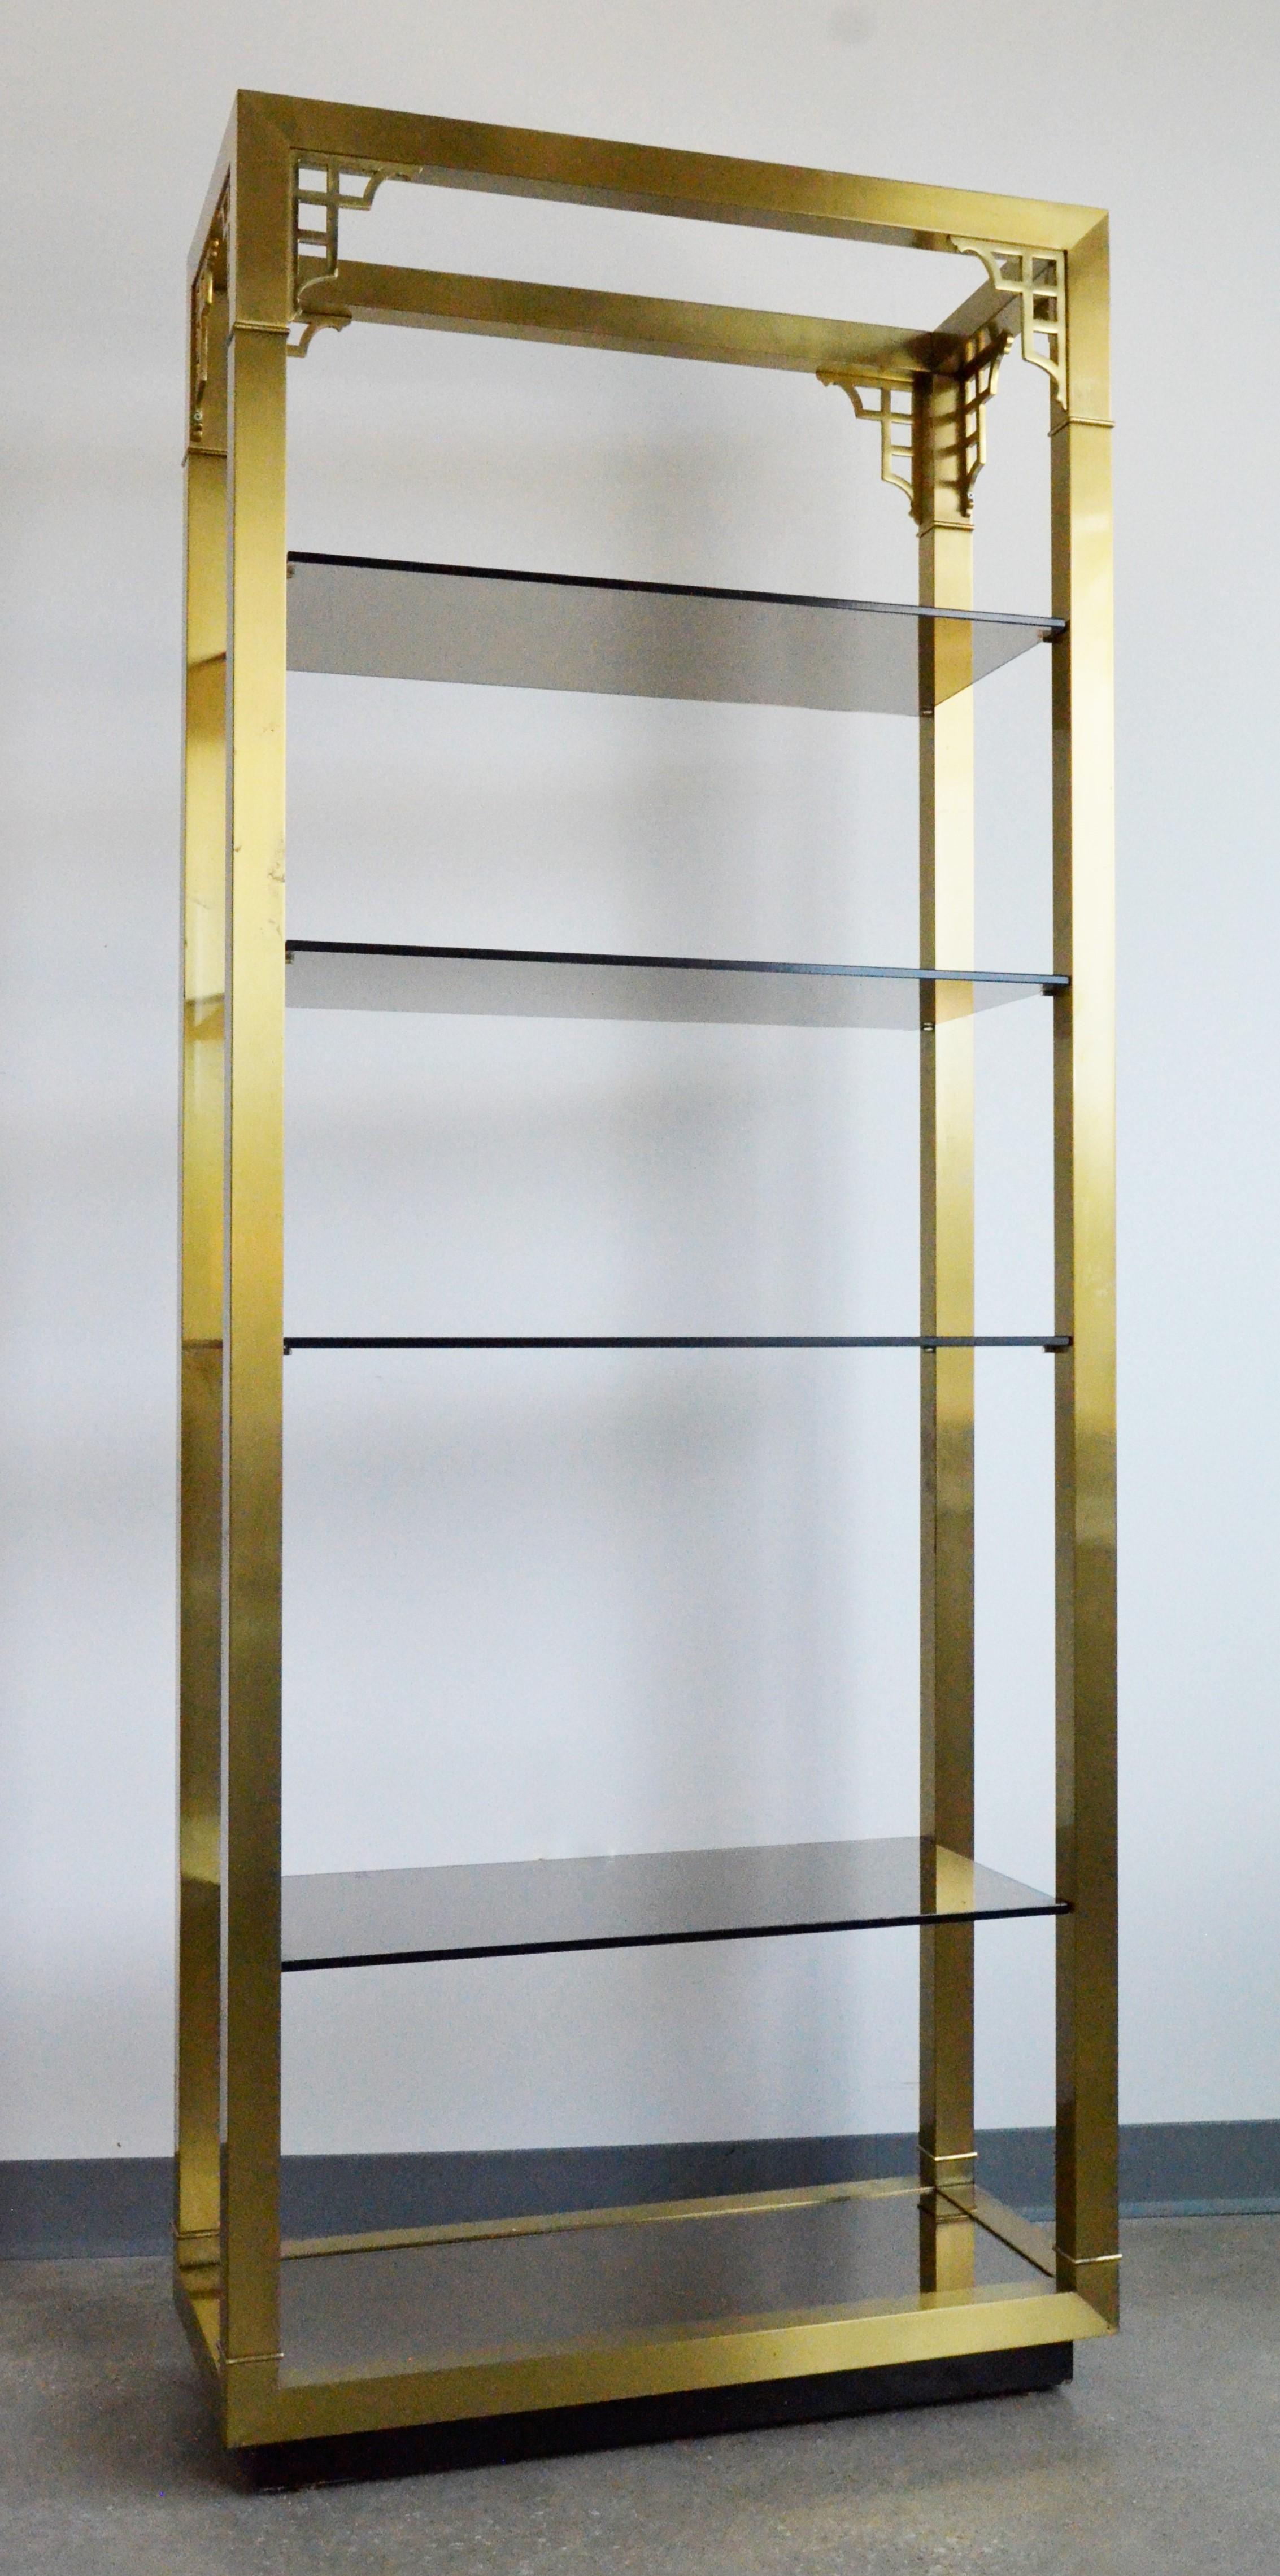 Offered is a Mid-Century Modern Mastercraft style chinoiserie style brass frame with four smoked glass shelves and one mirror bottom shelf étagère. This Hollywood glamour fashion forward piece is jewelry for any room. The étagère has plenty of